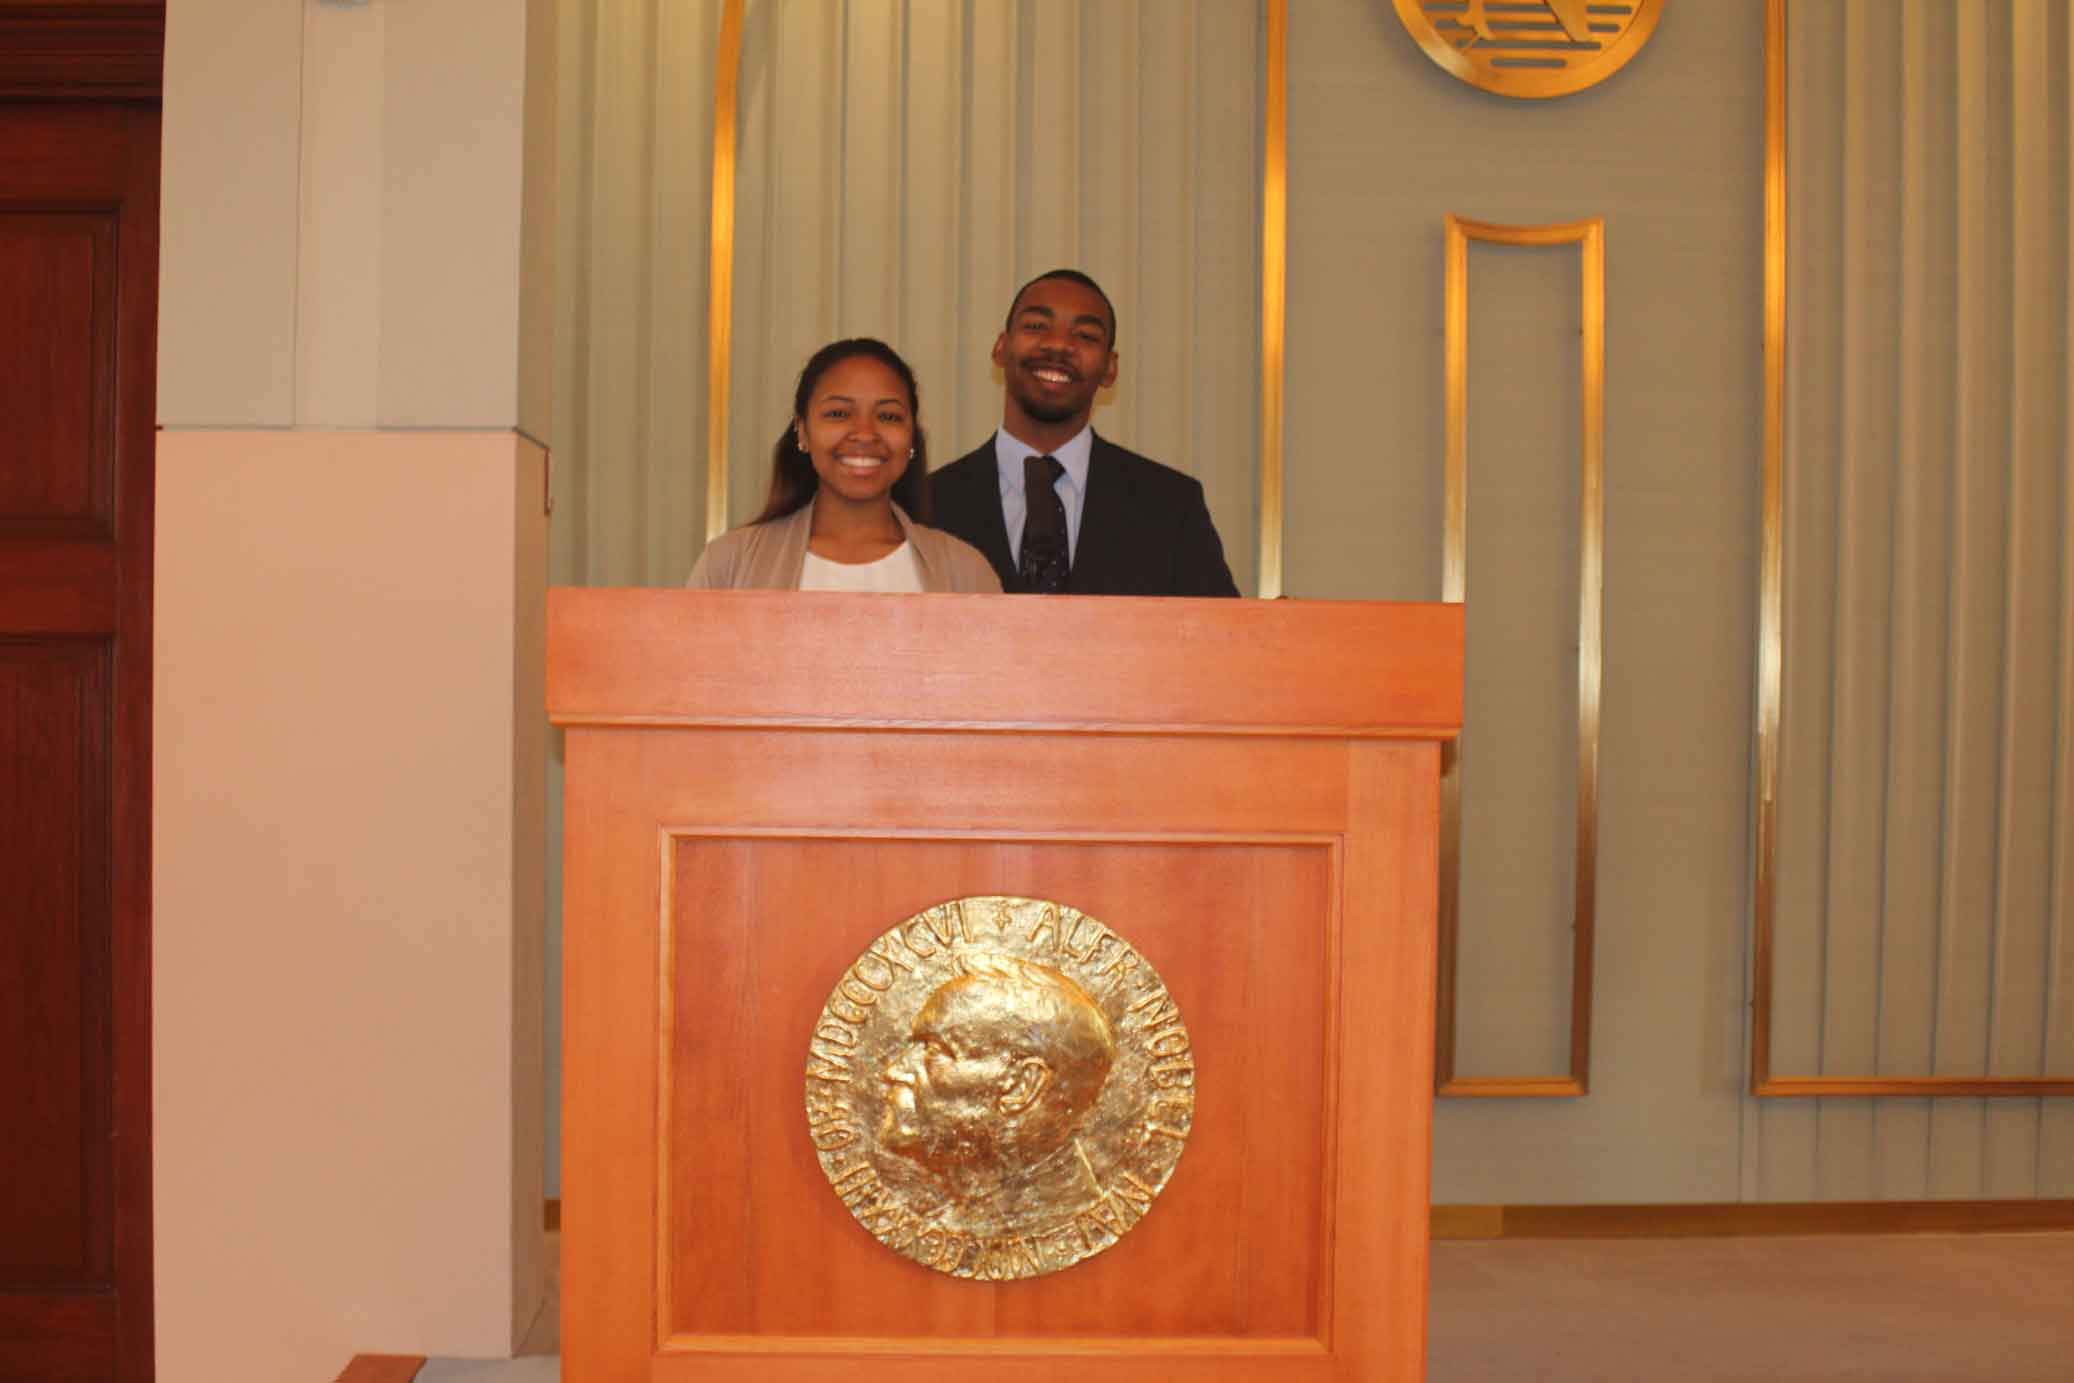 Two people at a podium